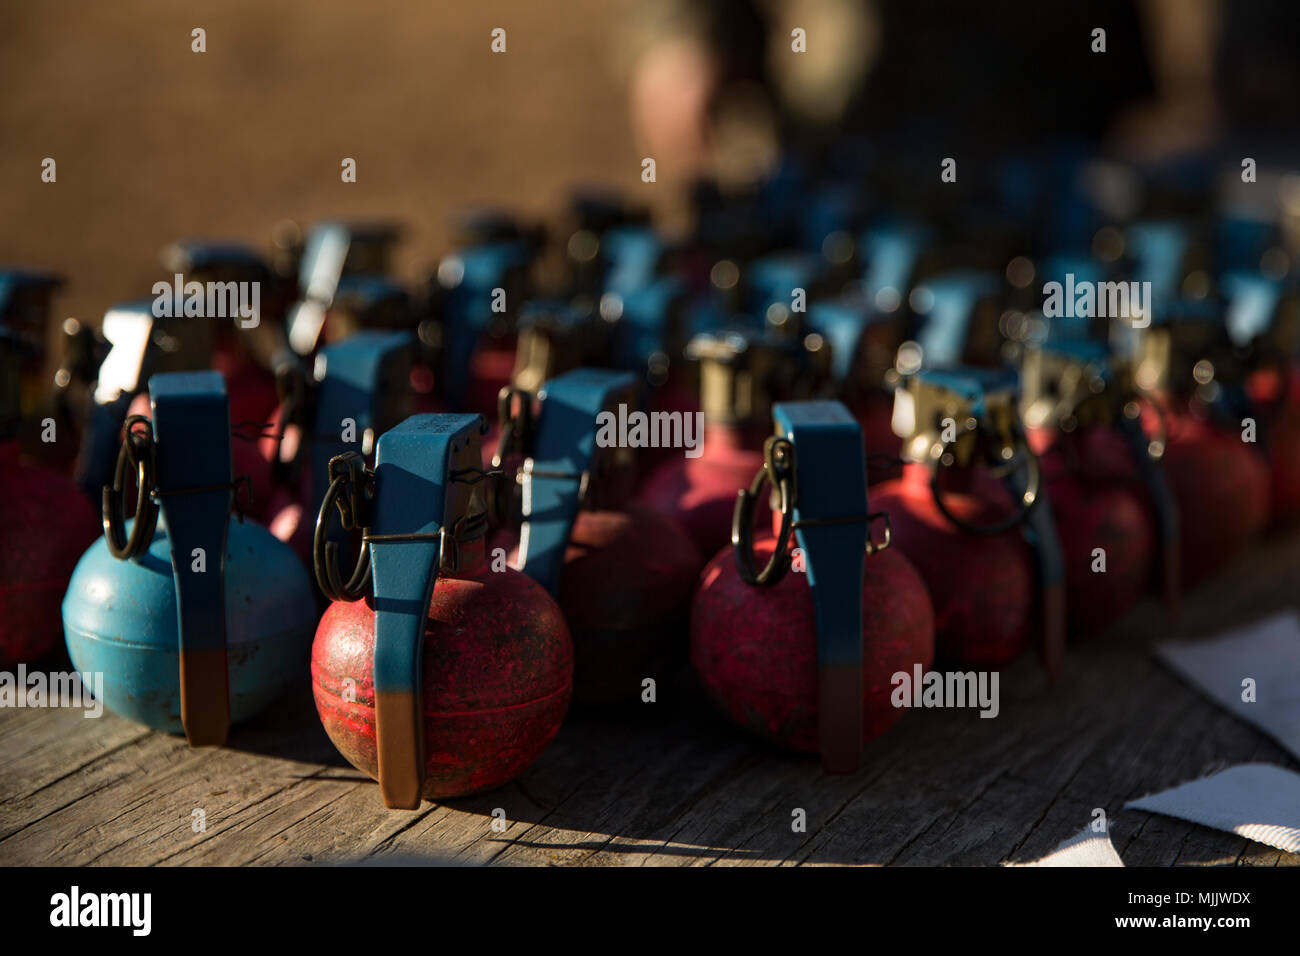 M69 practice hand grenades are staged, ready to be issued to Echo Co., 2nd Battalion, 8th Marine Regiment in order to conduct a practice grenade range during a Deployment for Training (DFT) on Fort AP Hill, VA, Dec. 1, 2017. (U.S. Marine Corps photo by Lance Cpl. Timothy J. Lutz) Stock Photo